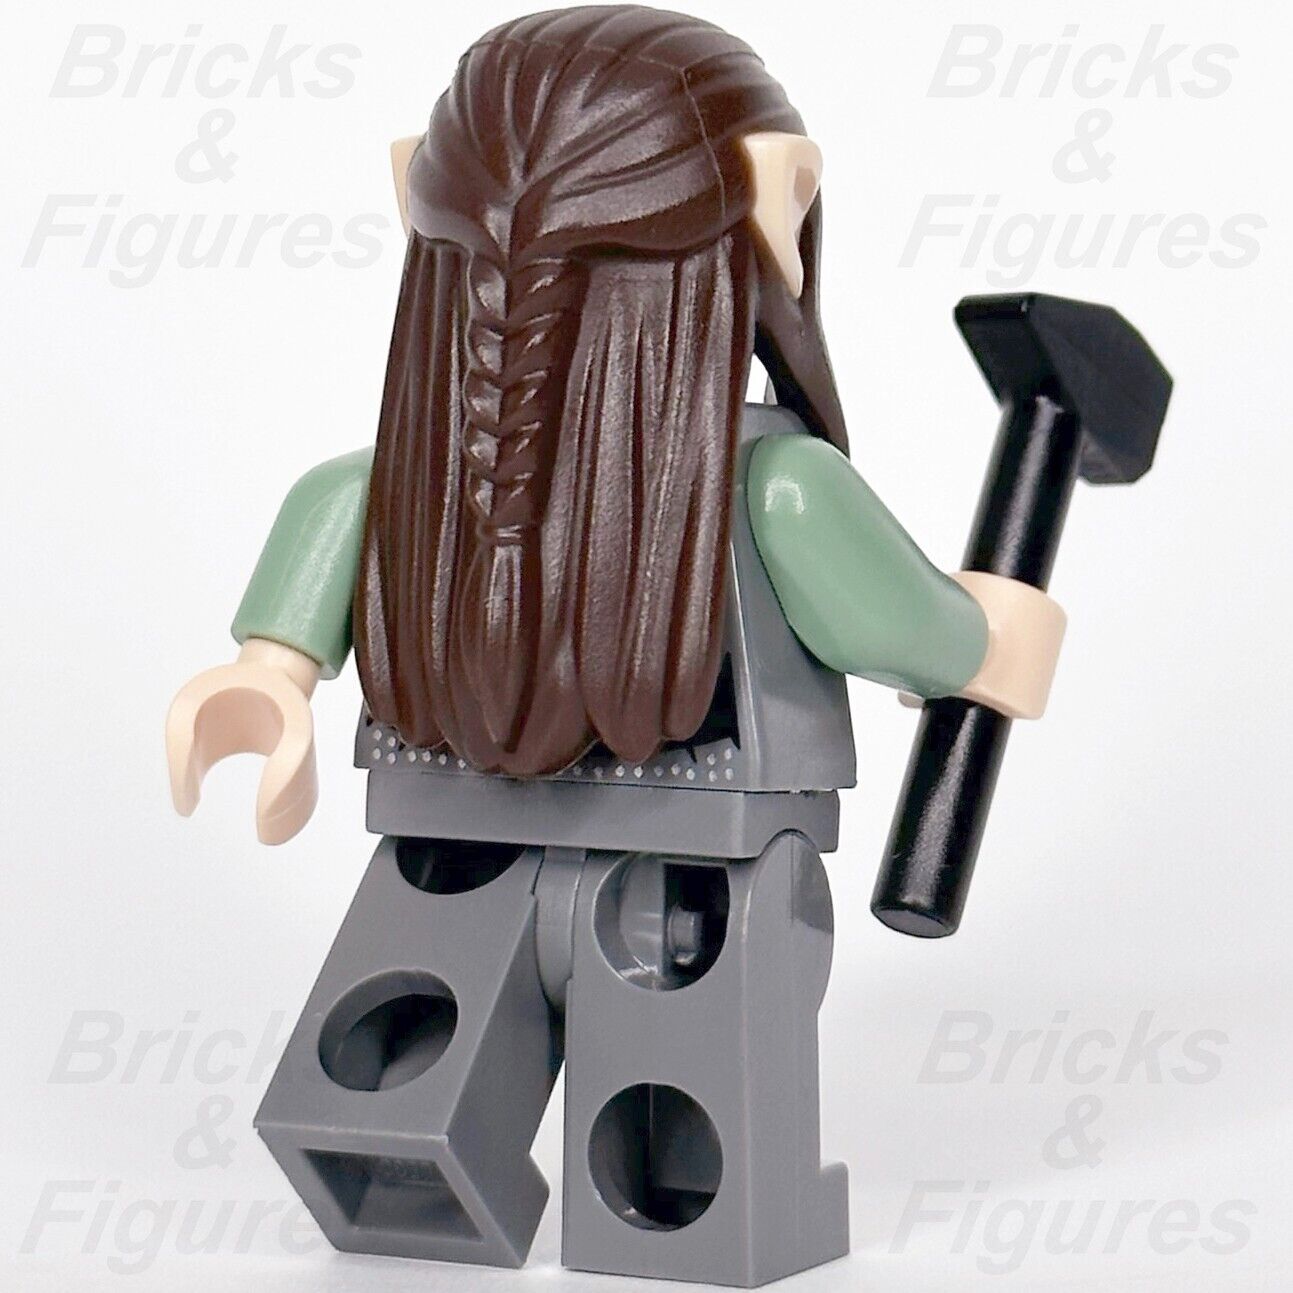 LEGO Rivendell Elf Minifigure The Hobbit & The Lord of the Rings 10316 lor122